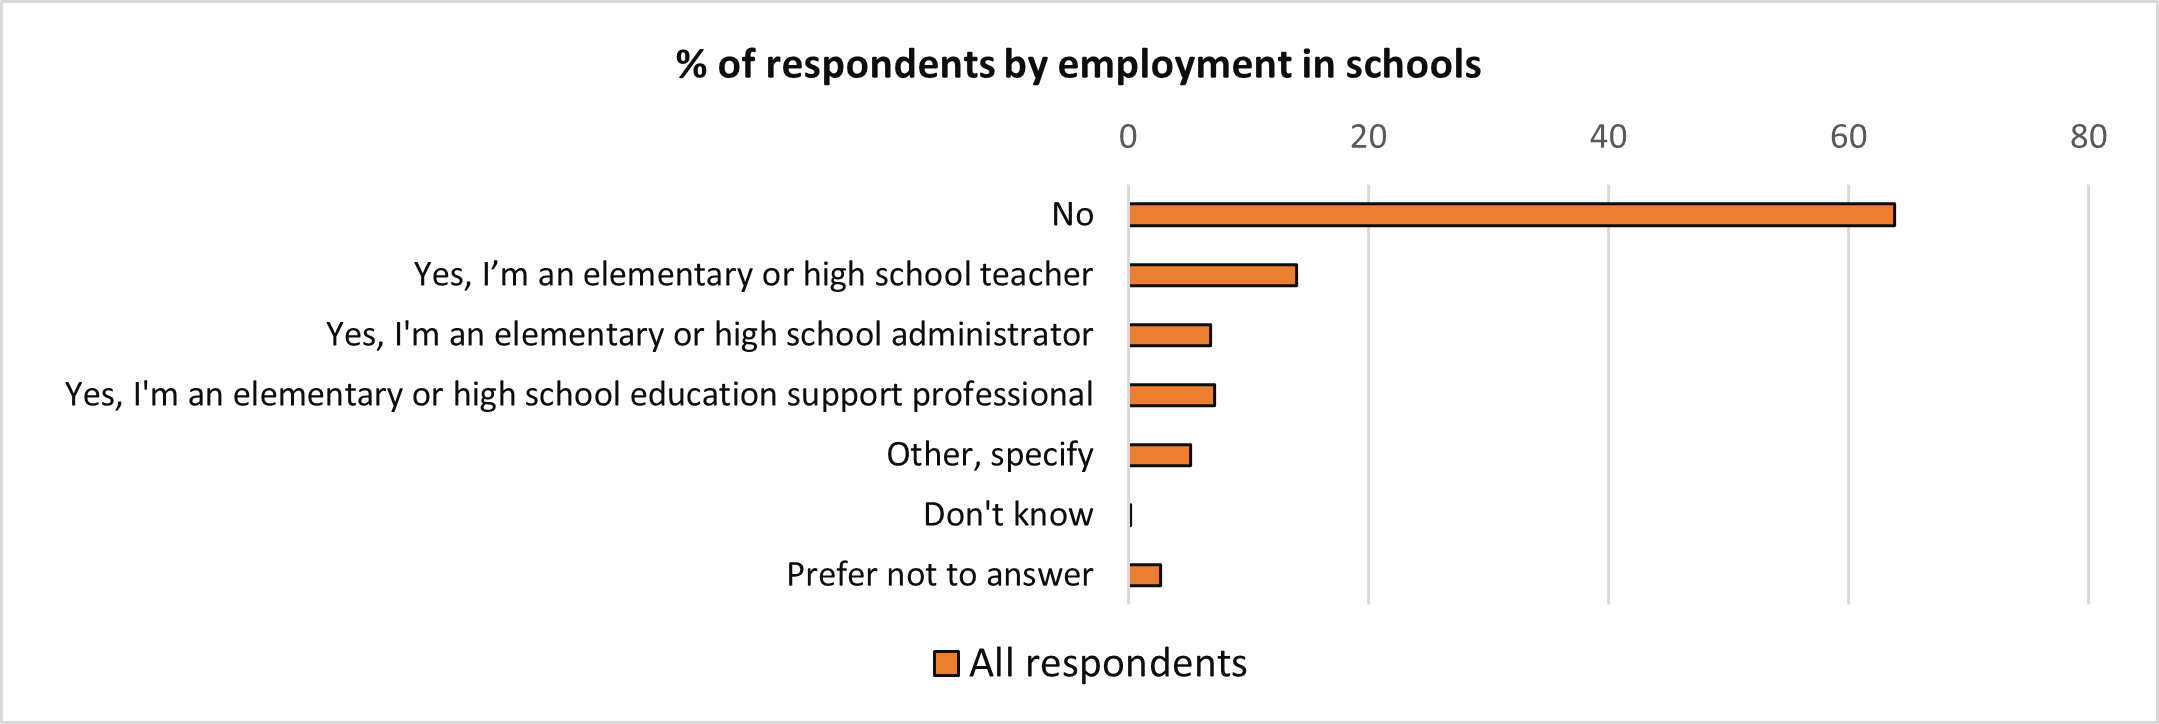 A bar chart of the percent of respondents by employment in schools. Text version below.